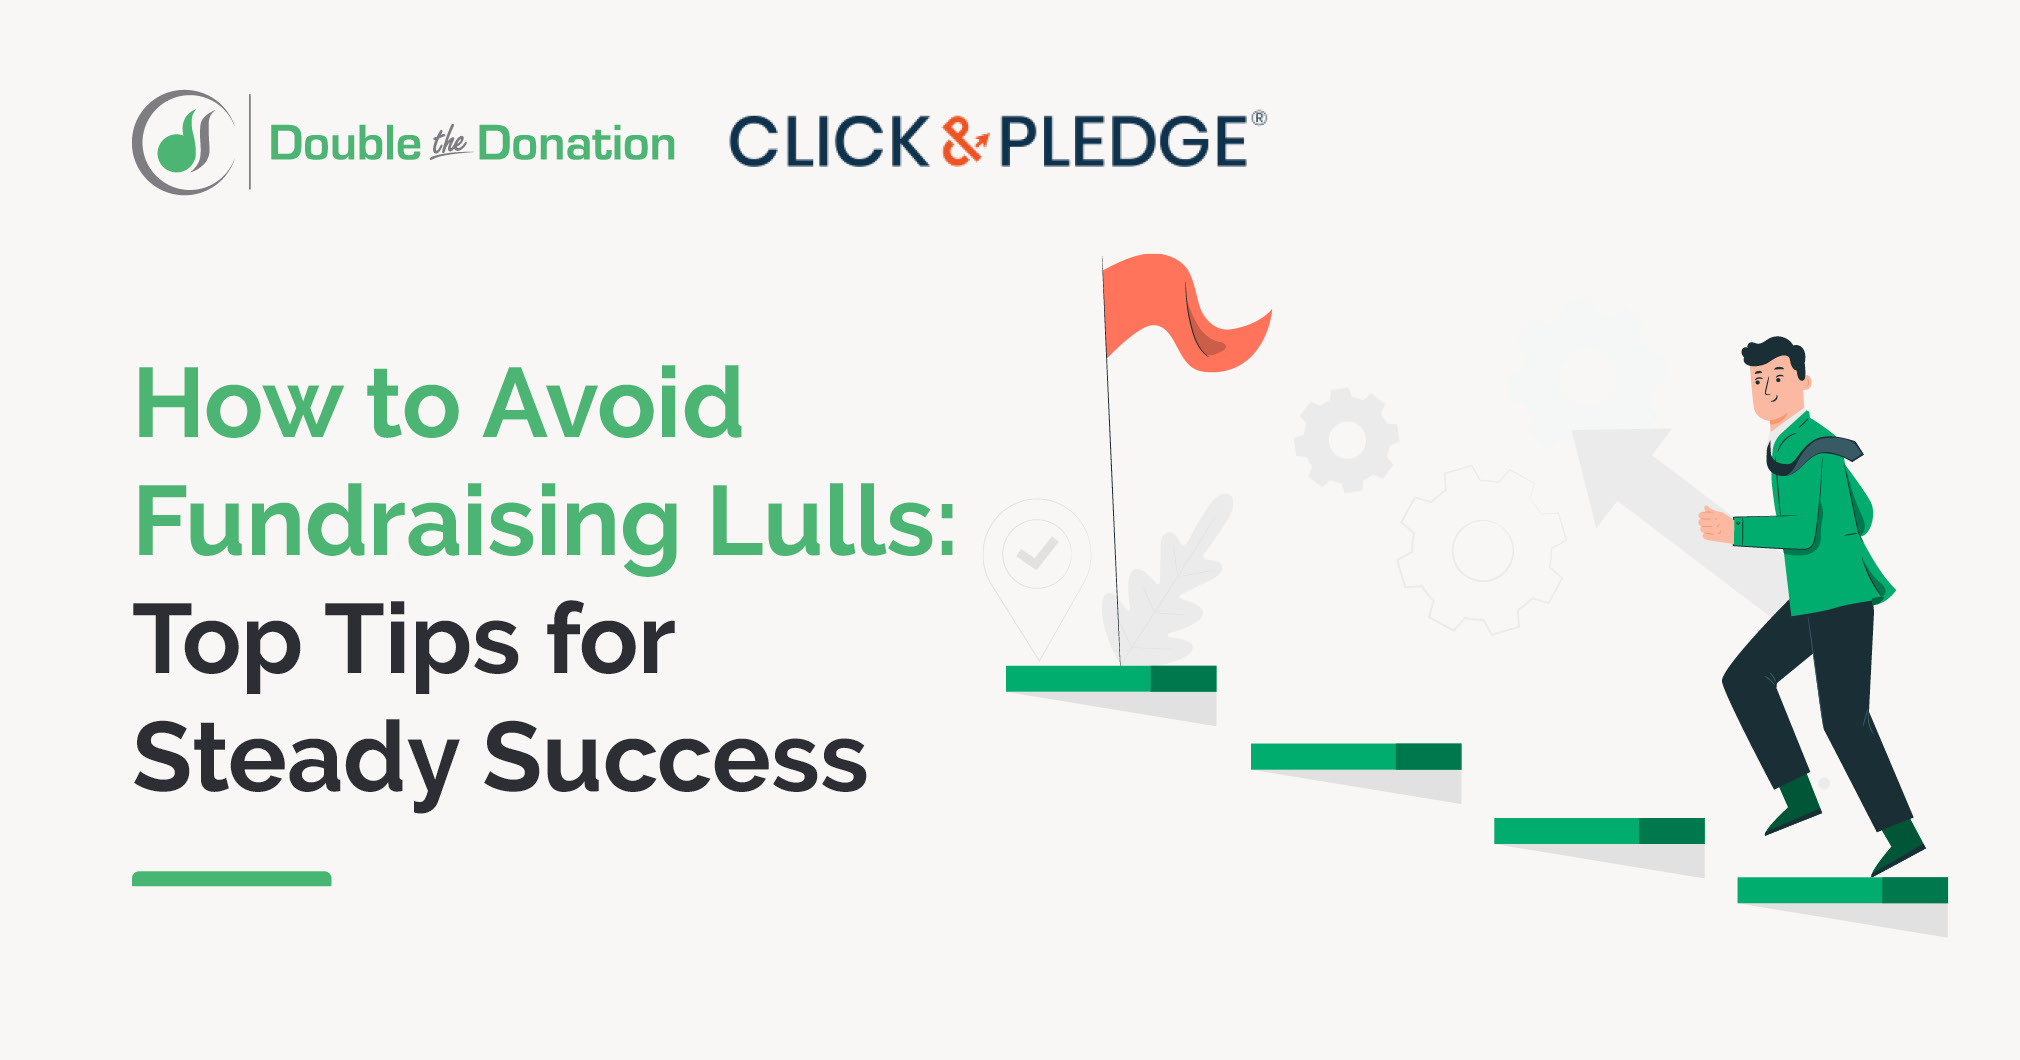 How to Avoid Fundraising Lulls: Top Tips for Steady Success